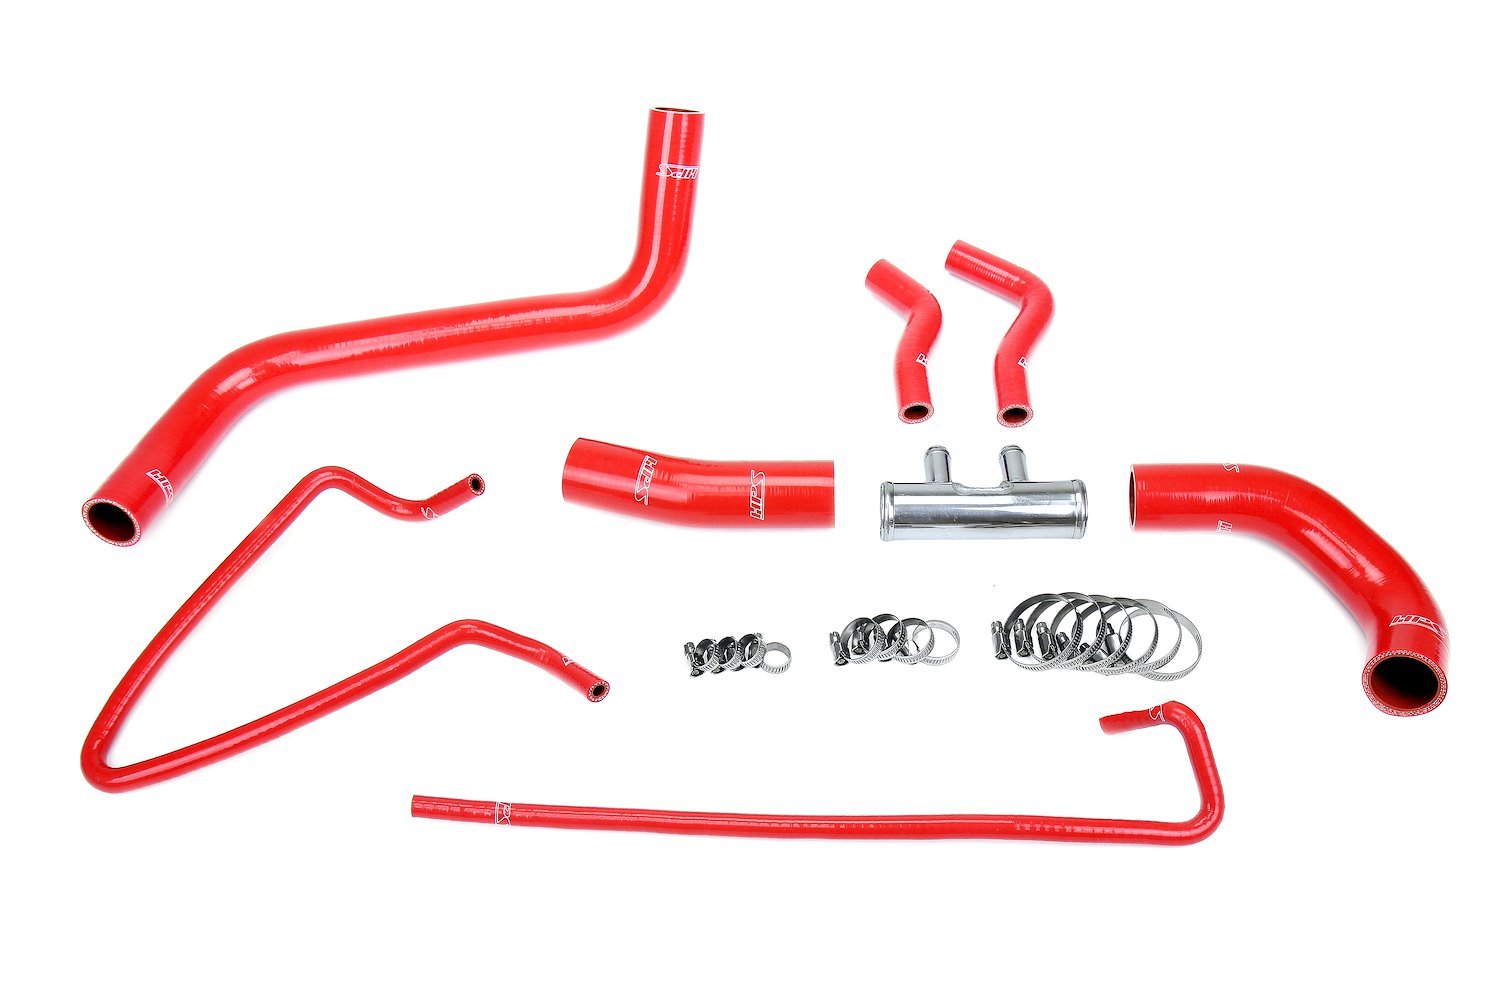 57-2064-RED Radiator Hose Kit, 3-Ply Reinforced Silicone, Replaces Rubber Radiator Coolant Hoses